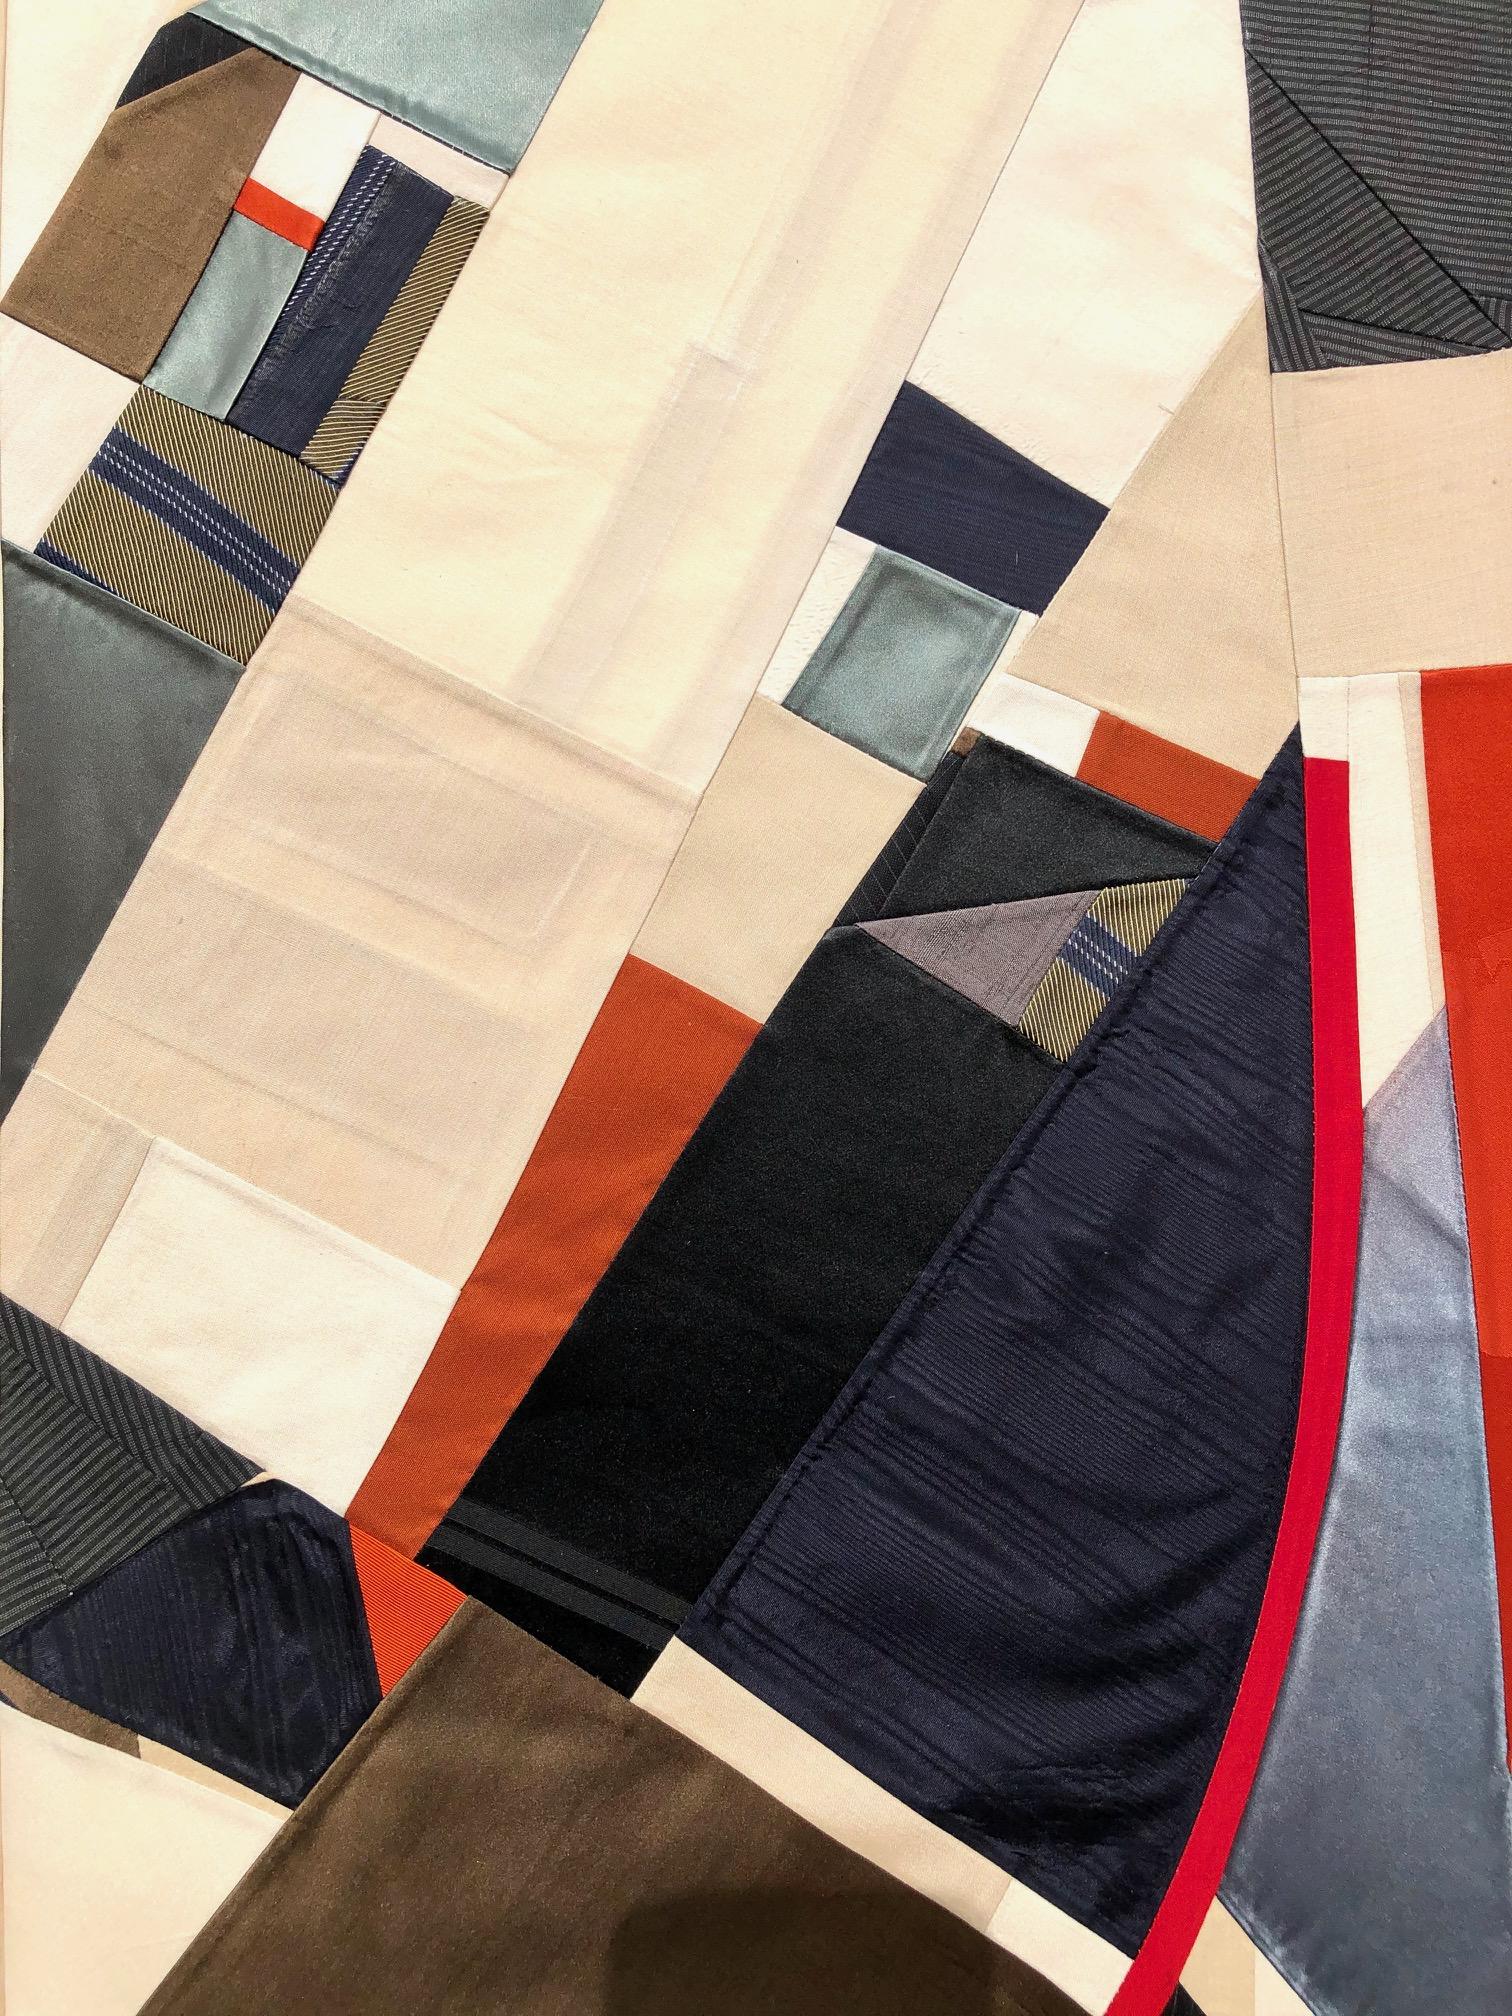 Debra Smith
Looking Back-Transition of Two #5, 2020
pieced vintage silk
38 x 20 in.
(smi107)

This large abstract textile collage by Debra Smith features bold patterns in red, black, and white silk.  It is currently available at Kathryn Markel Fine